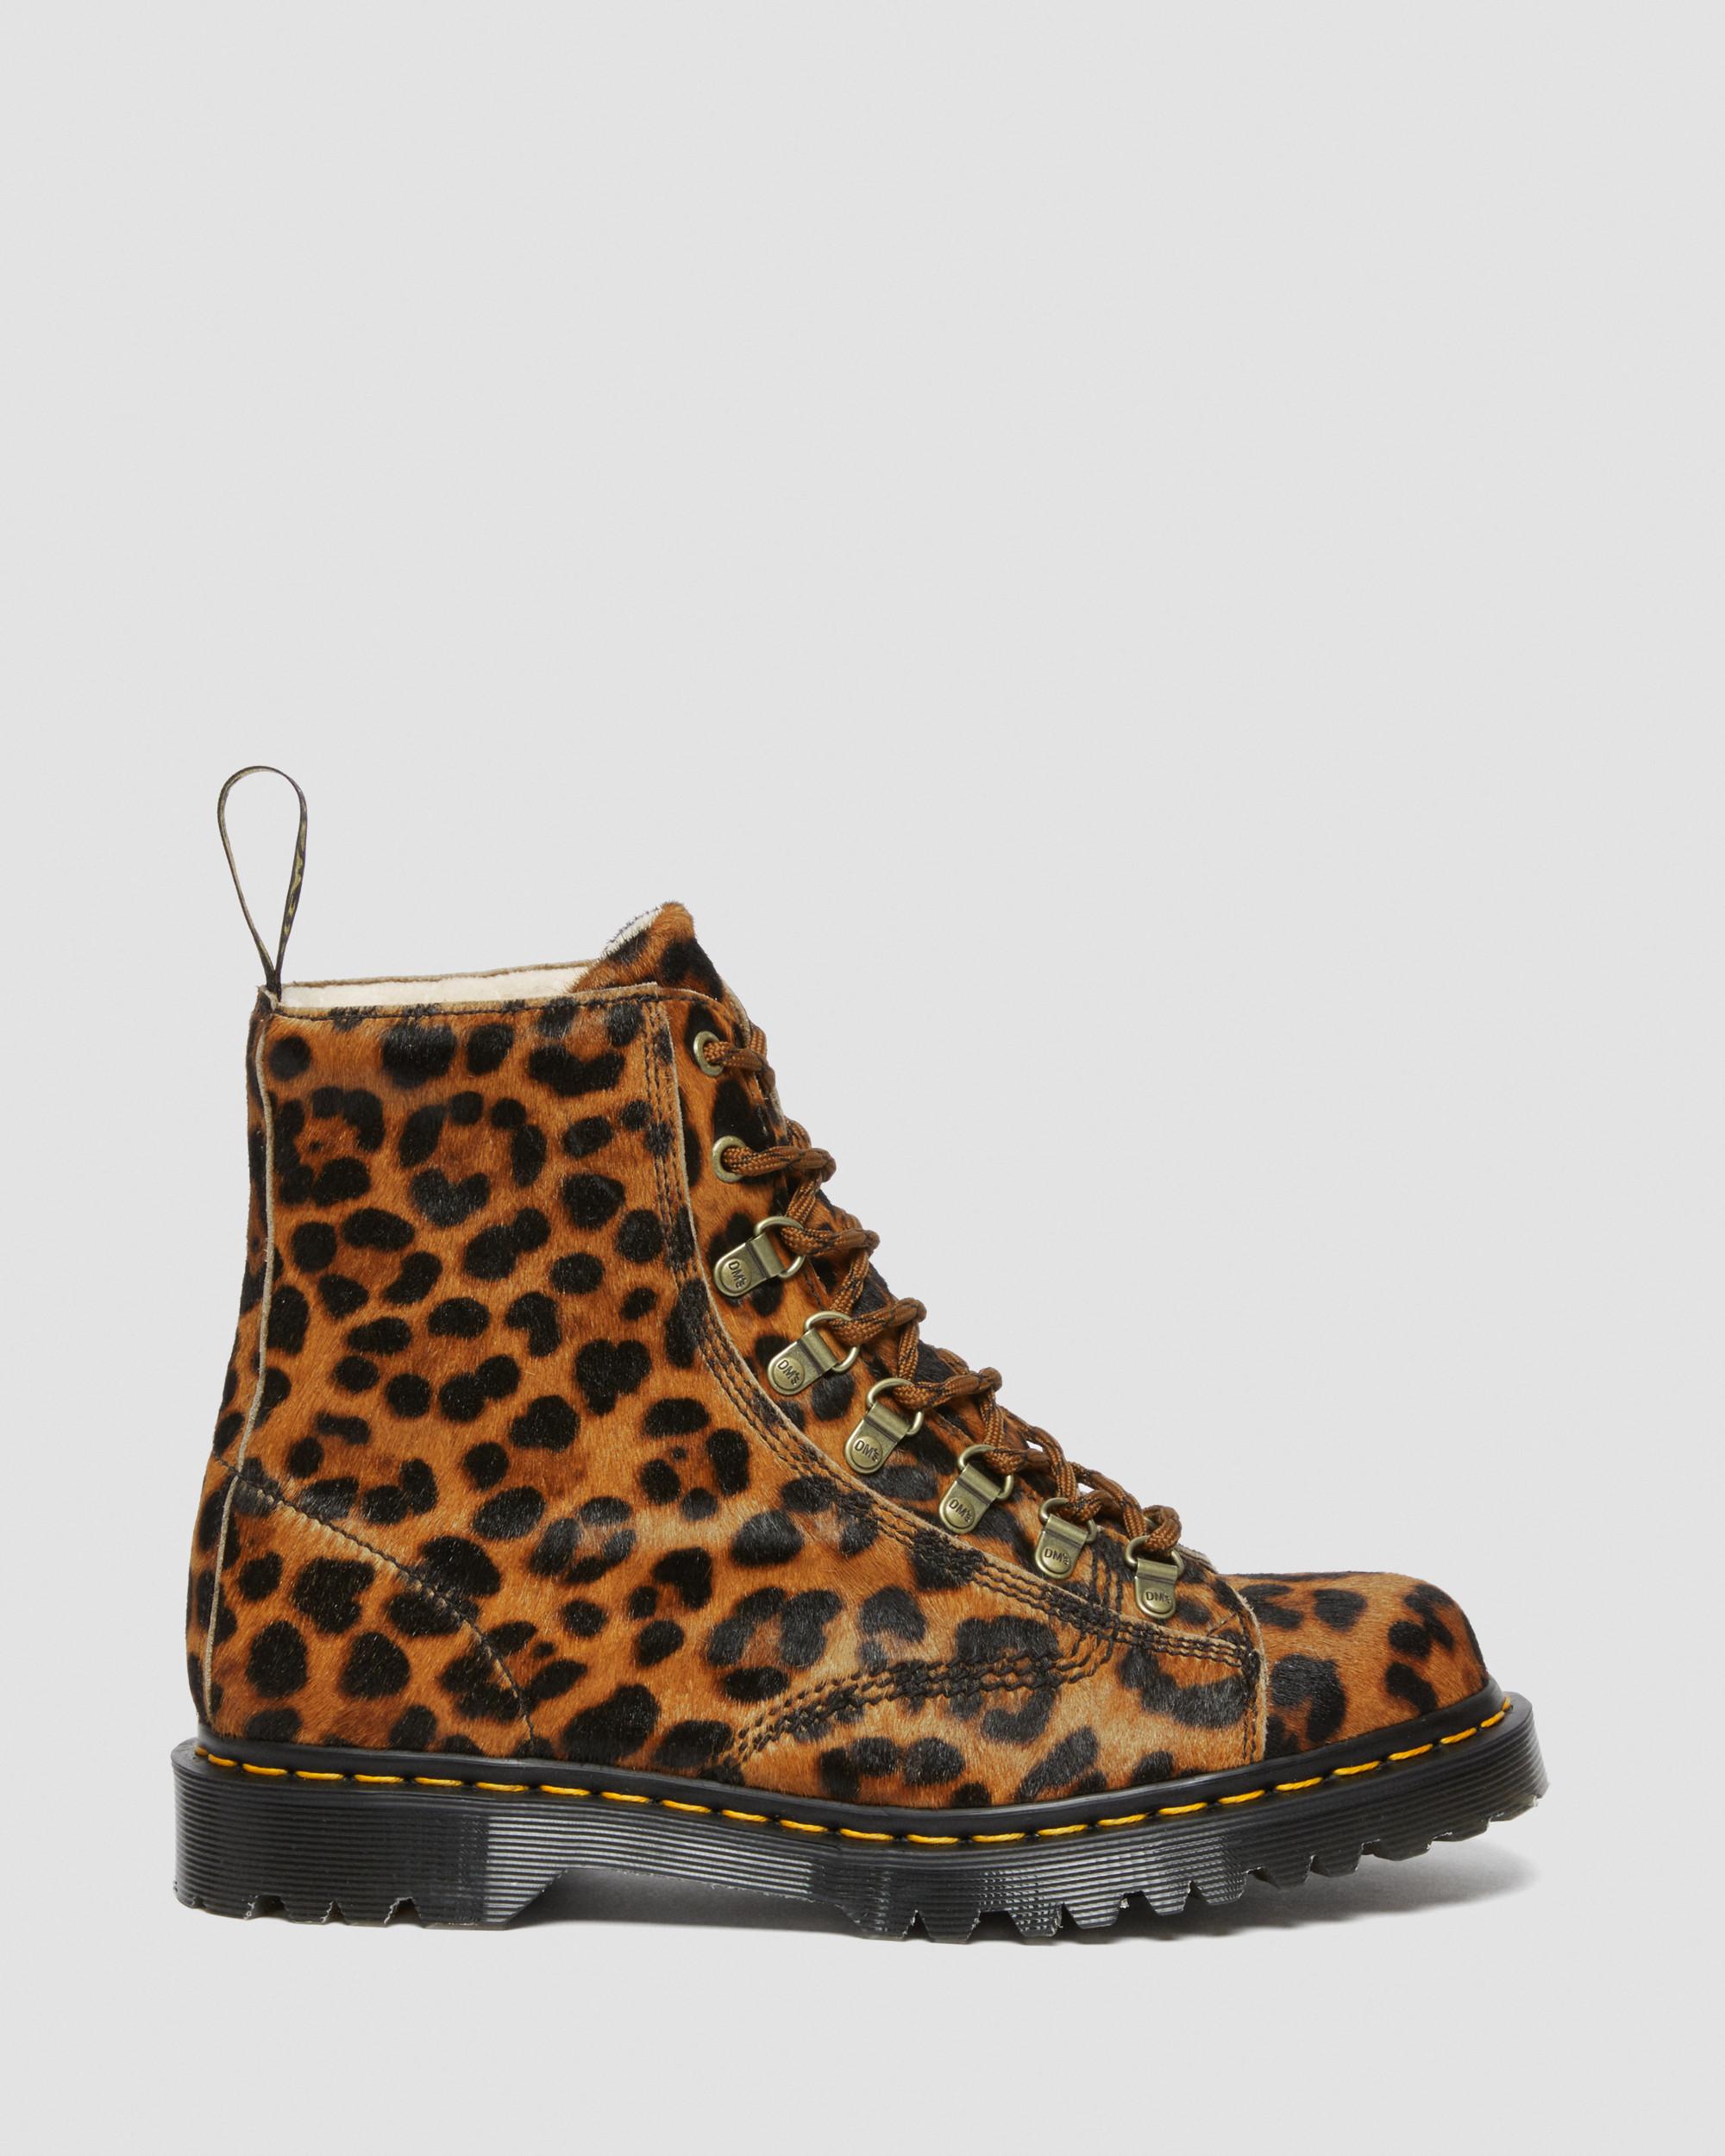 Barton Made in England Leopard Boots in Multi | Dr. Martens